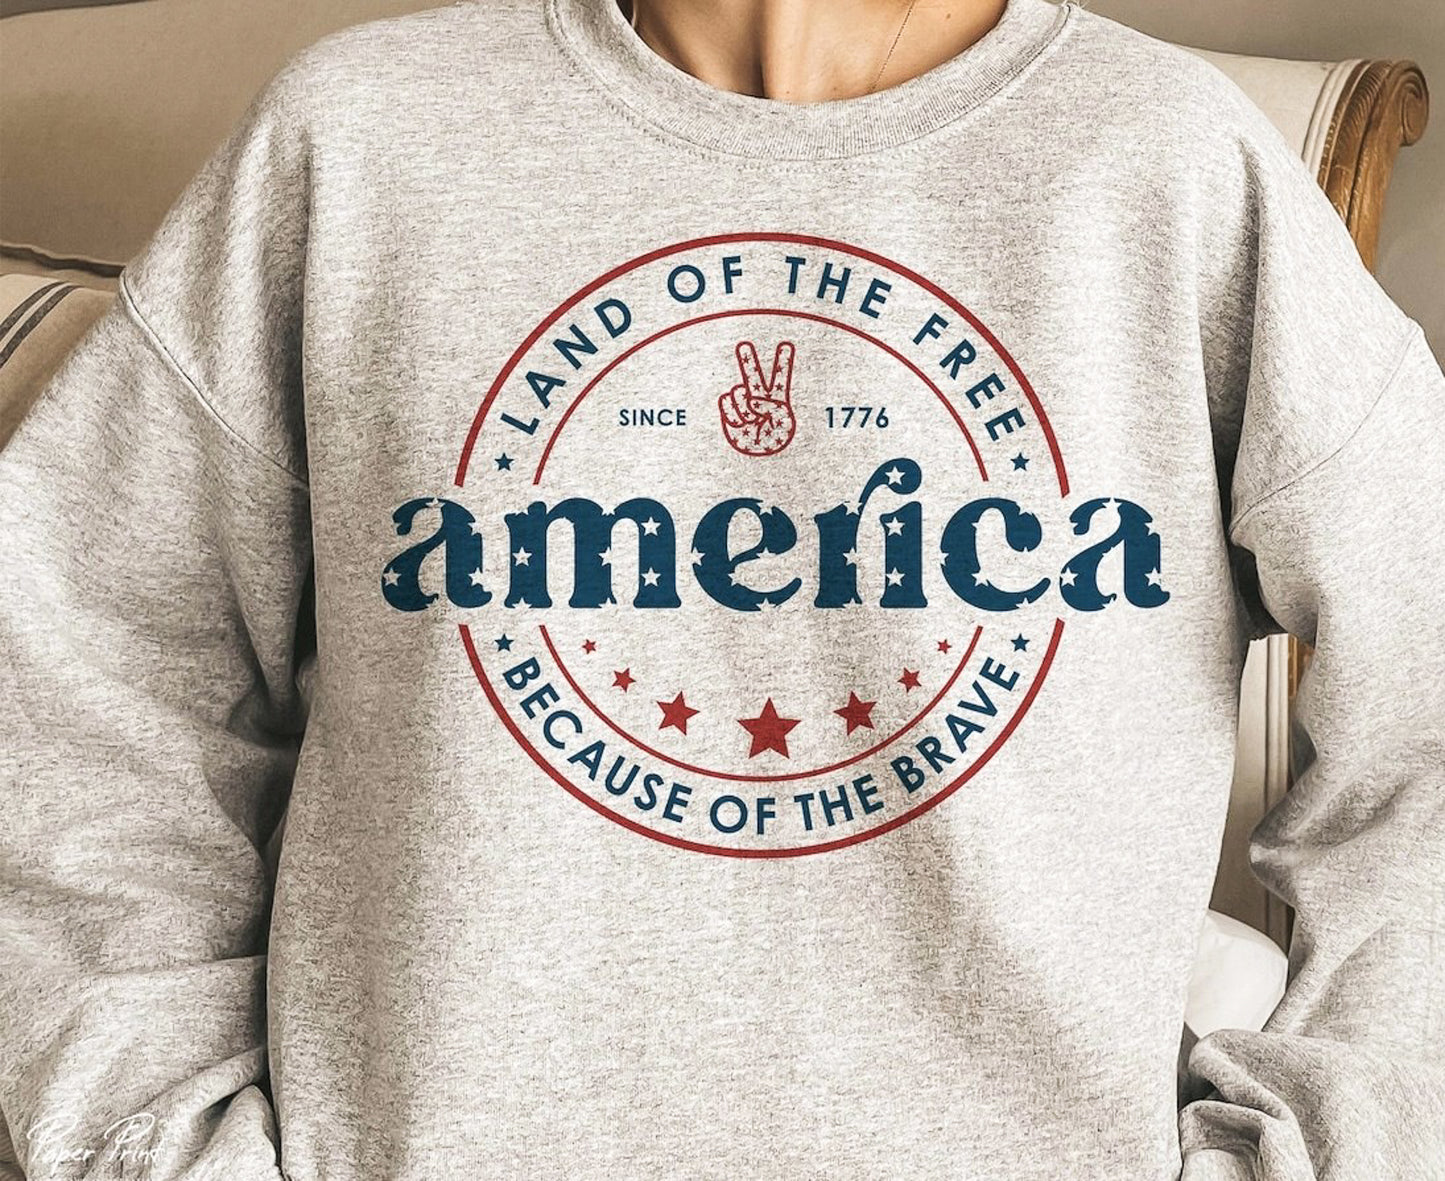 America: Land of The Free Because Of The Brave Crew Sweatshirt